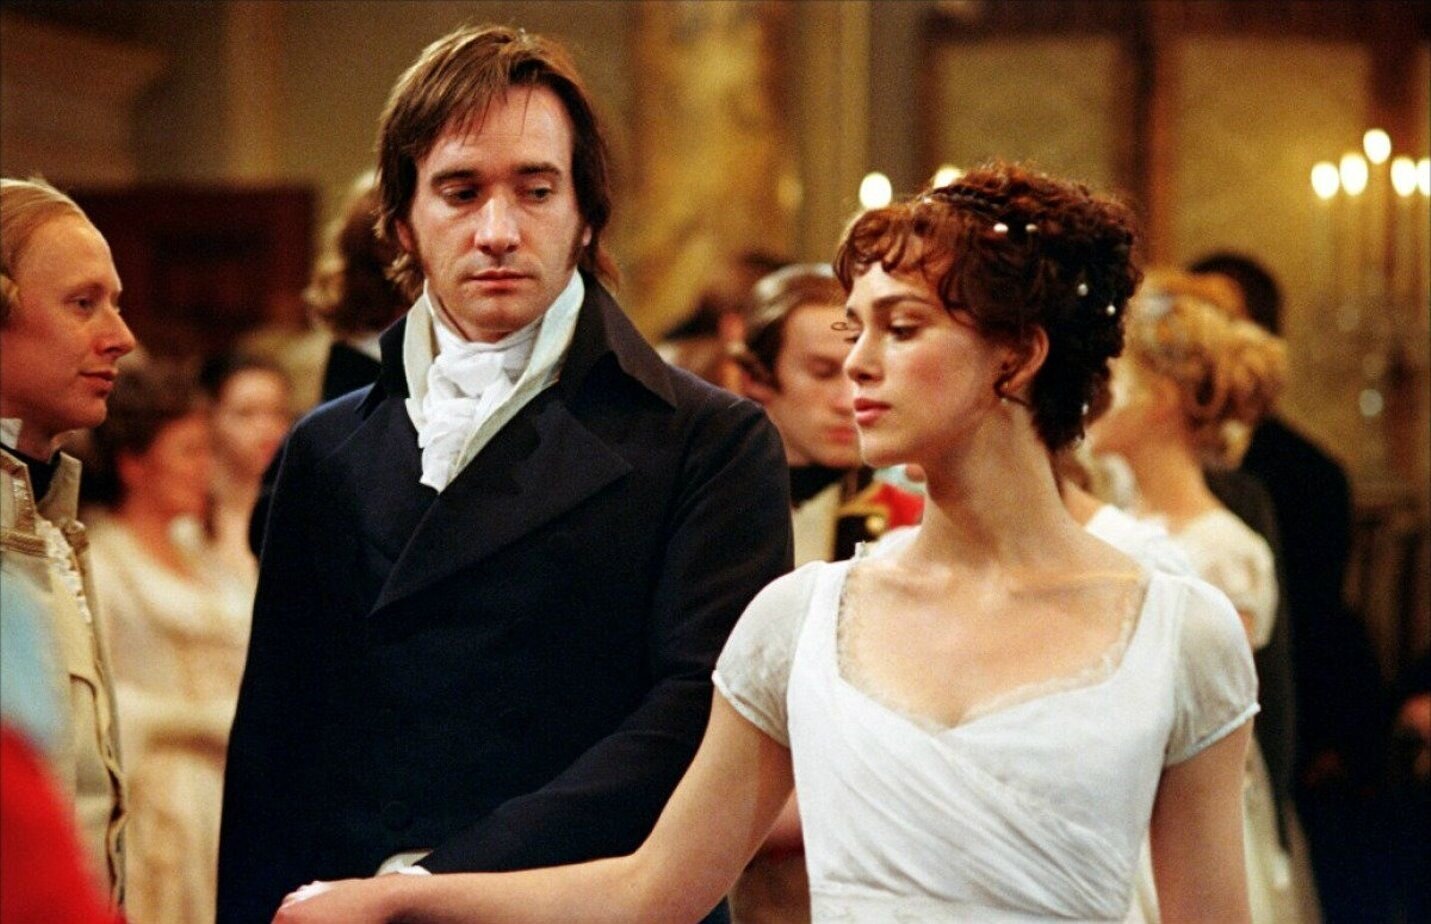 "Pride and Prejudice": Meaning, Analysis and Problematics of Jane Austen's Novel